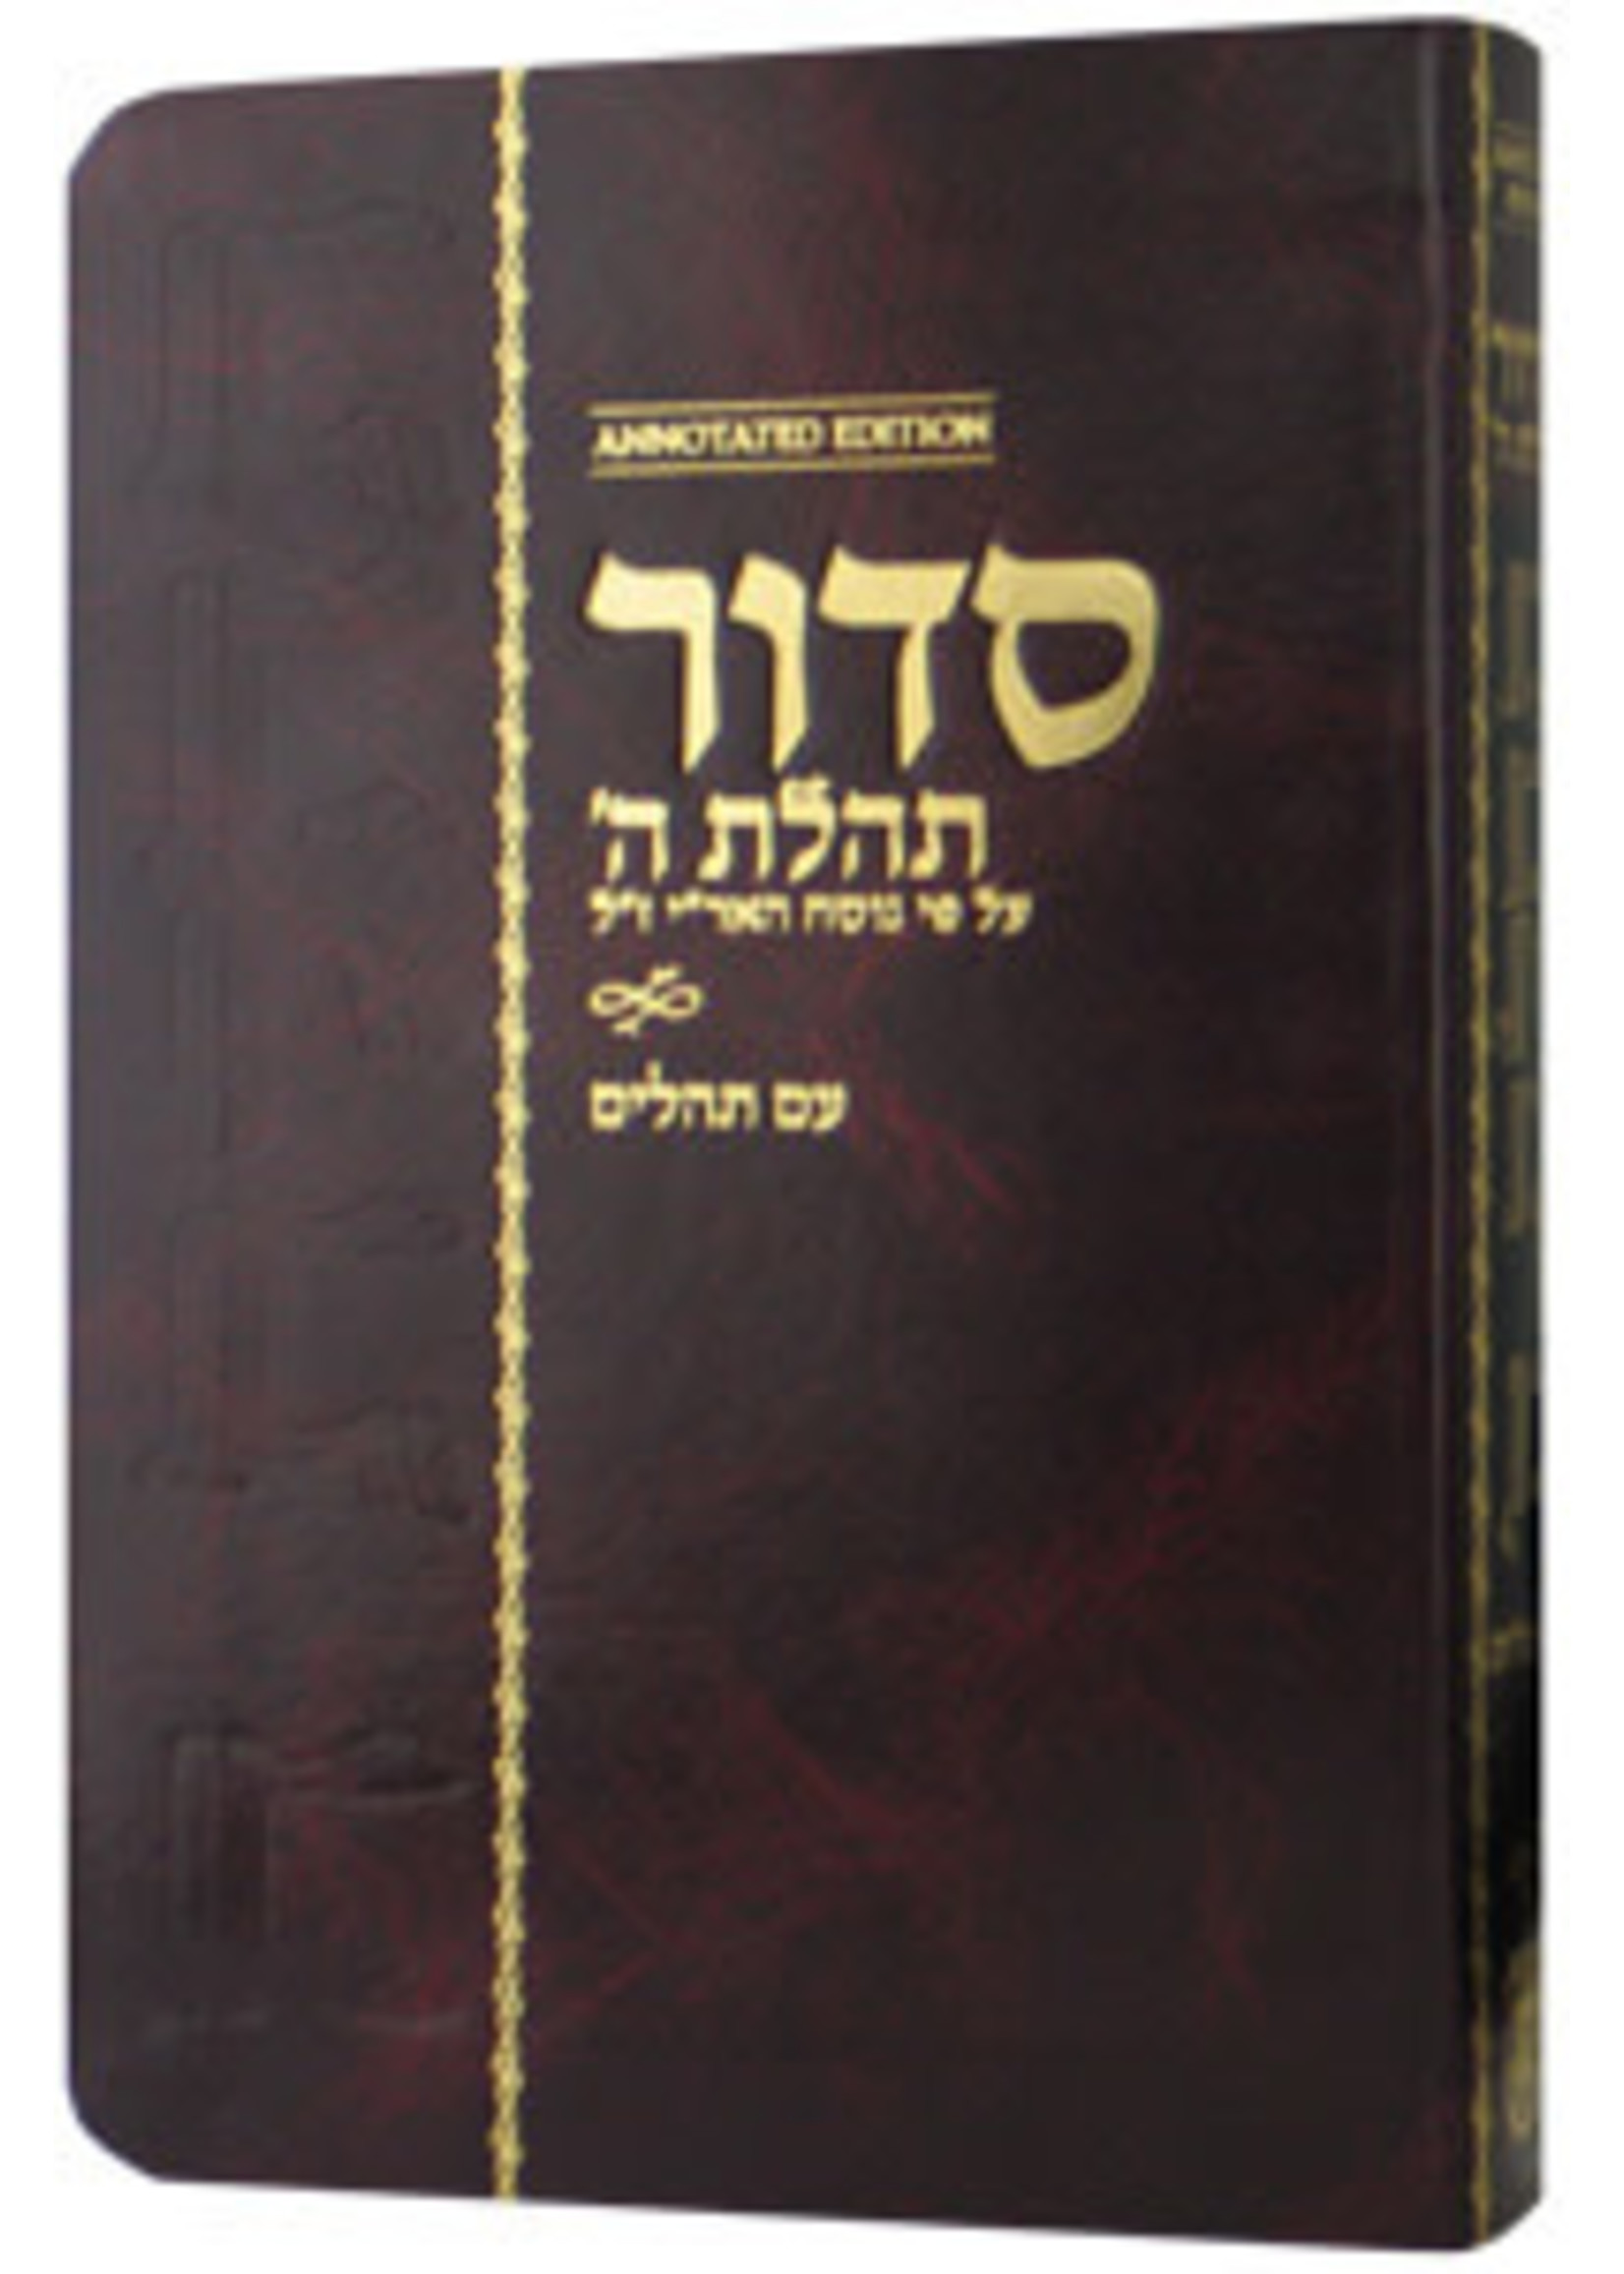 SIDDUR T"H HEB ANNOTATED F/S EP-STH.AH